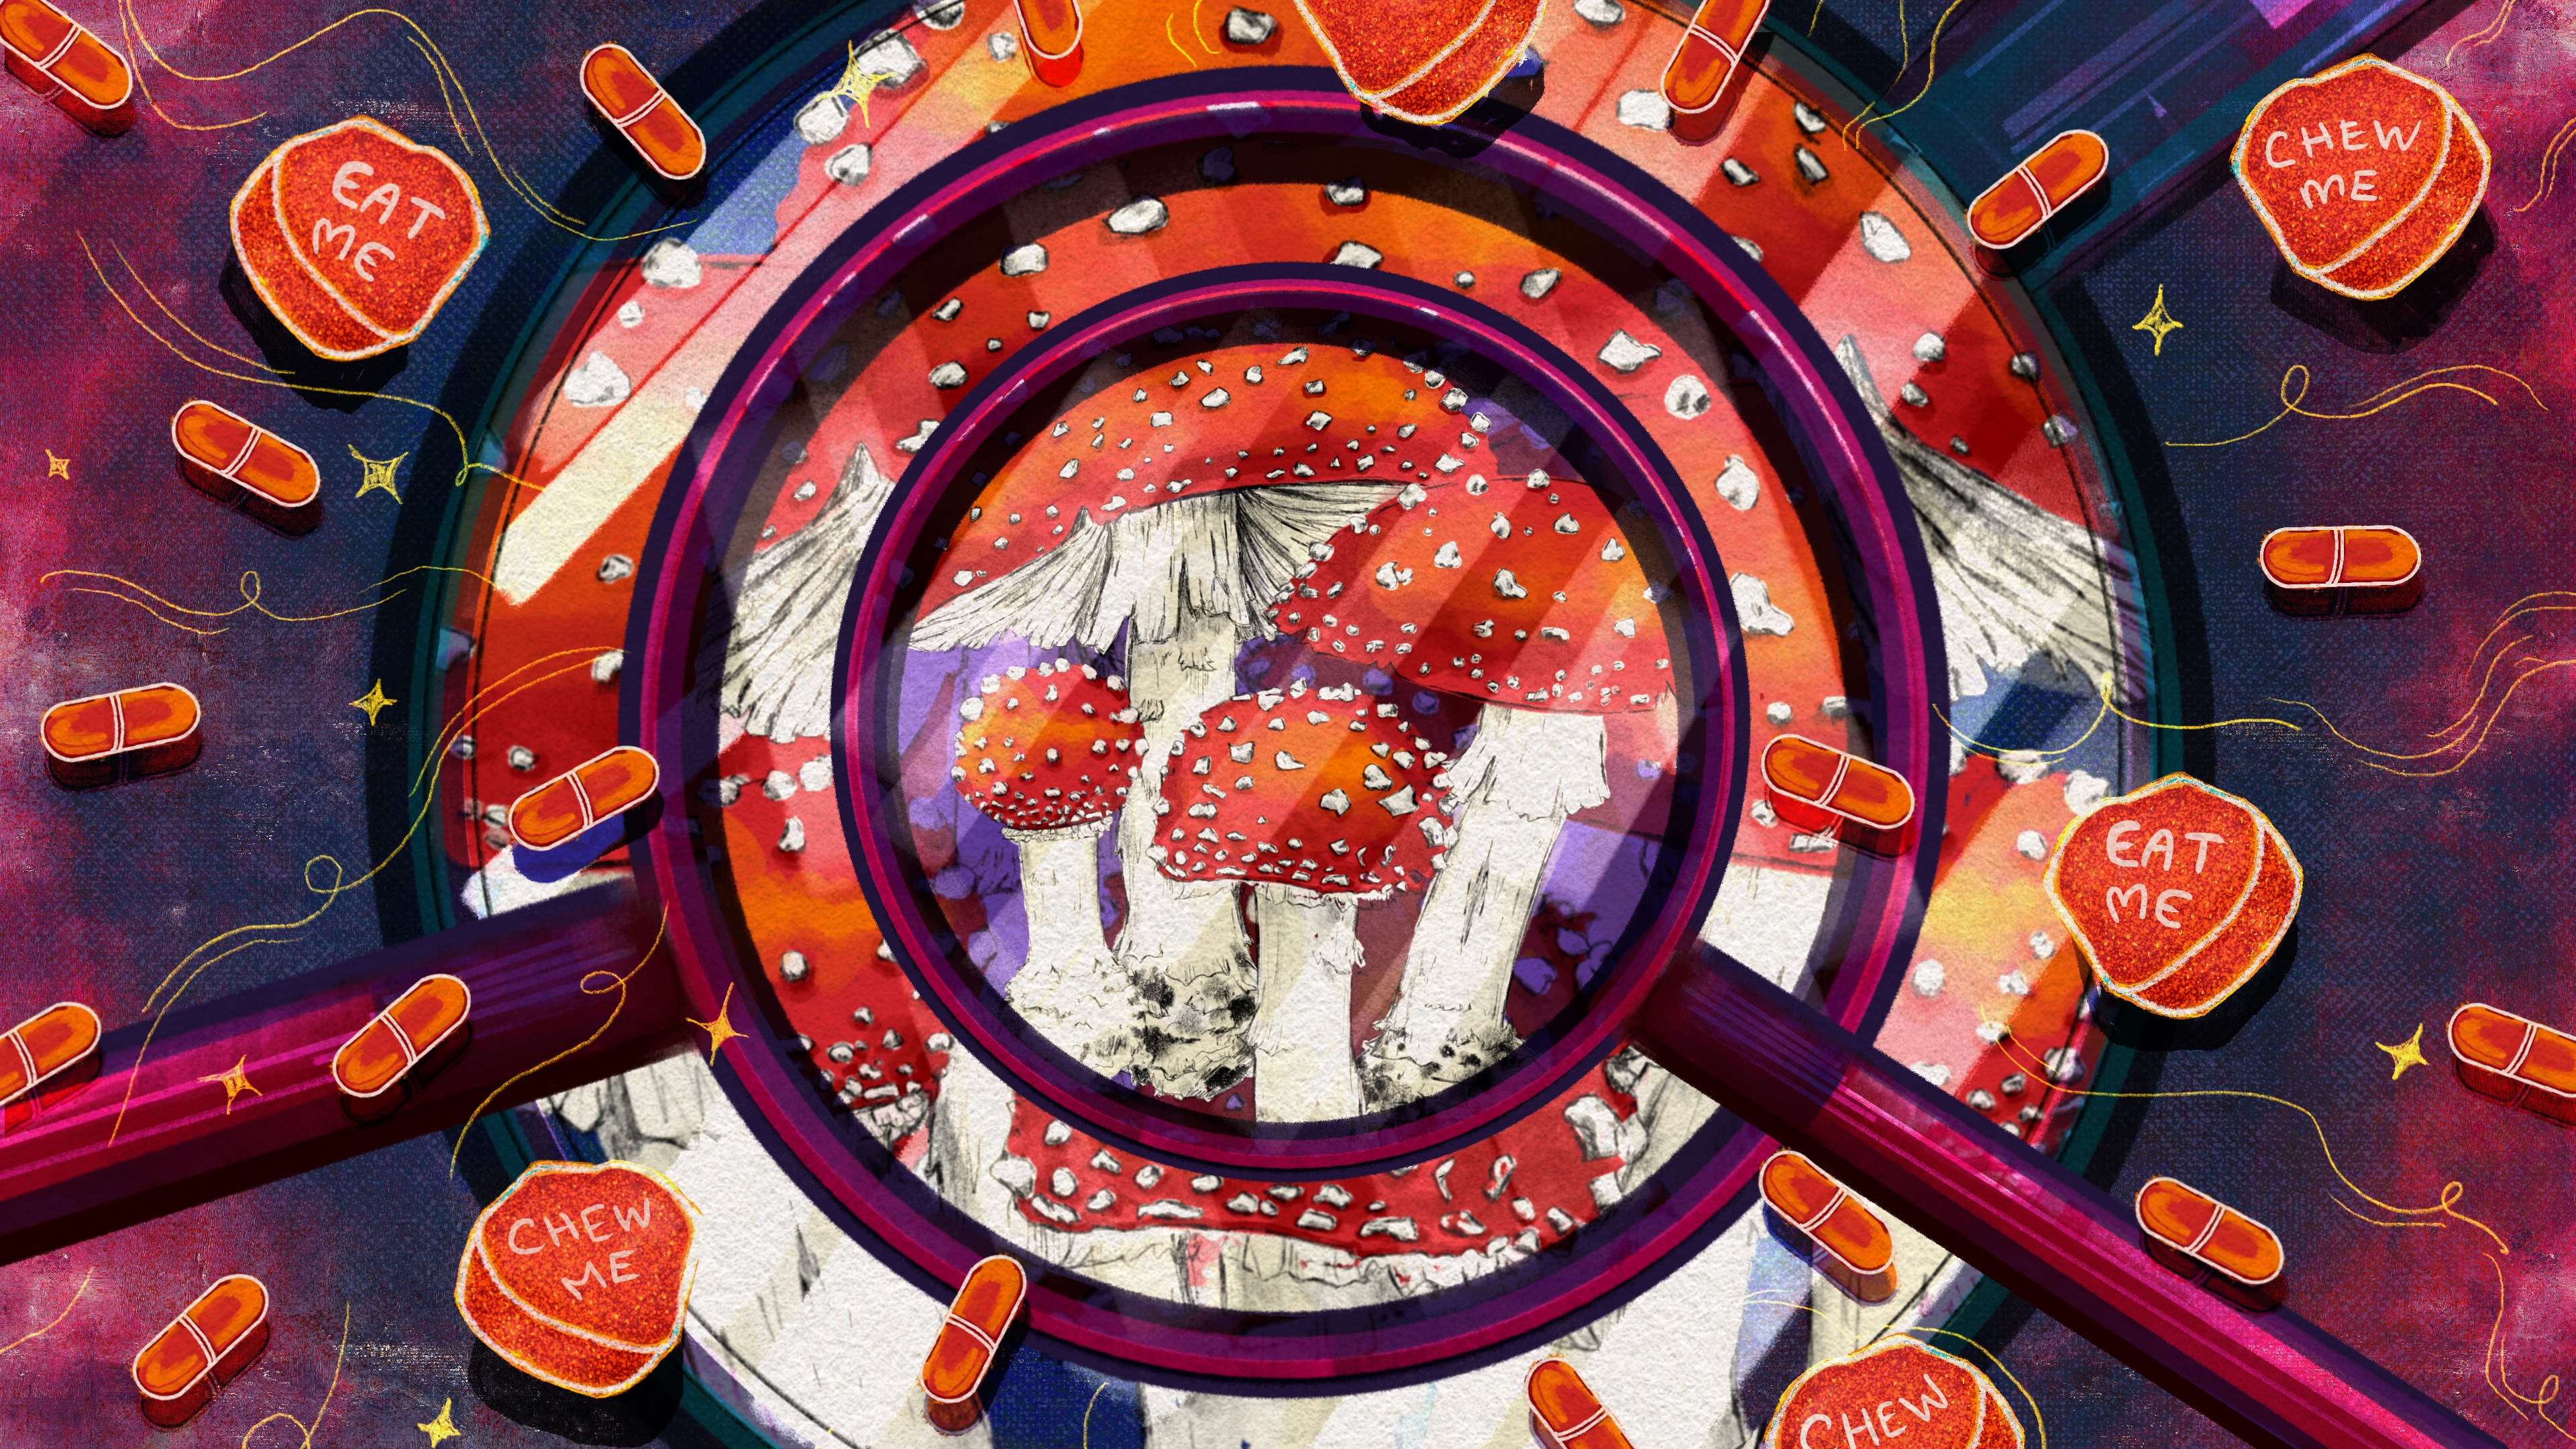 A digital illustration in bright Copic marker and pencil shows a cluster of realistically drawn Amanita muscaria mushrooms in different phases of growth, from the “button” stage to fully mature. These mushrooms have a distinct red cap covered in small, white nubs, which give it a spotted appearance. The gills and stem are a cream-white color. Popping out from the mushrooms in a whimsical style are gummies that variously read “eat me” and “chew me,” as well as capsules. Both ingestible products are colored the same red as the mushroom’s cap to indicate they are mushroom products. Multiple magnifying glasses are stacked on top of the mushrooms, distorting them while symbolizing the confusing information on the legality and safety of their use. The background is a deep blue, which fades to magenta, giving the image a dreamlike feel.